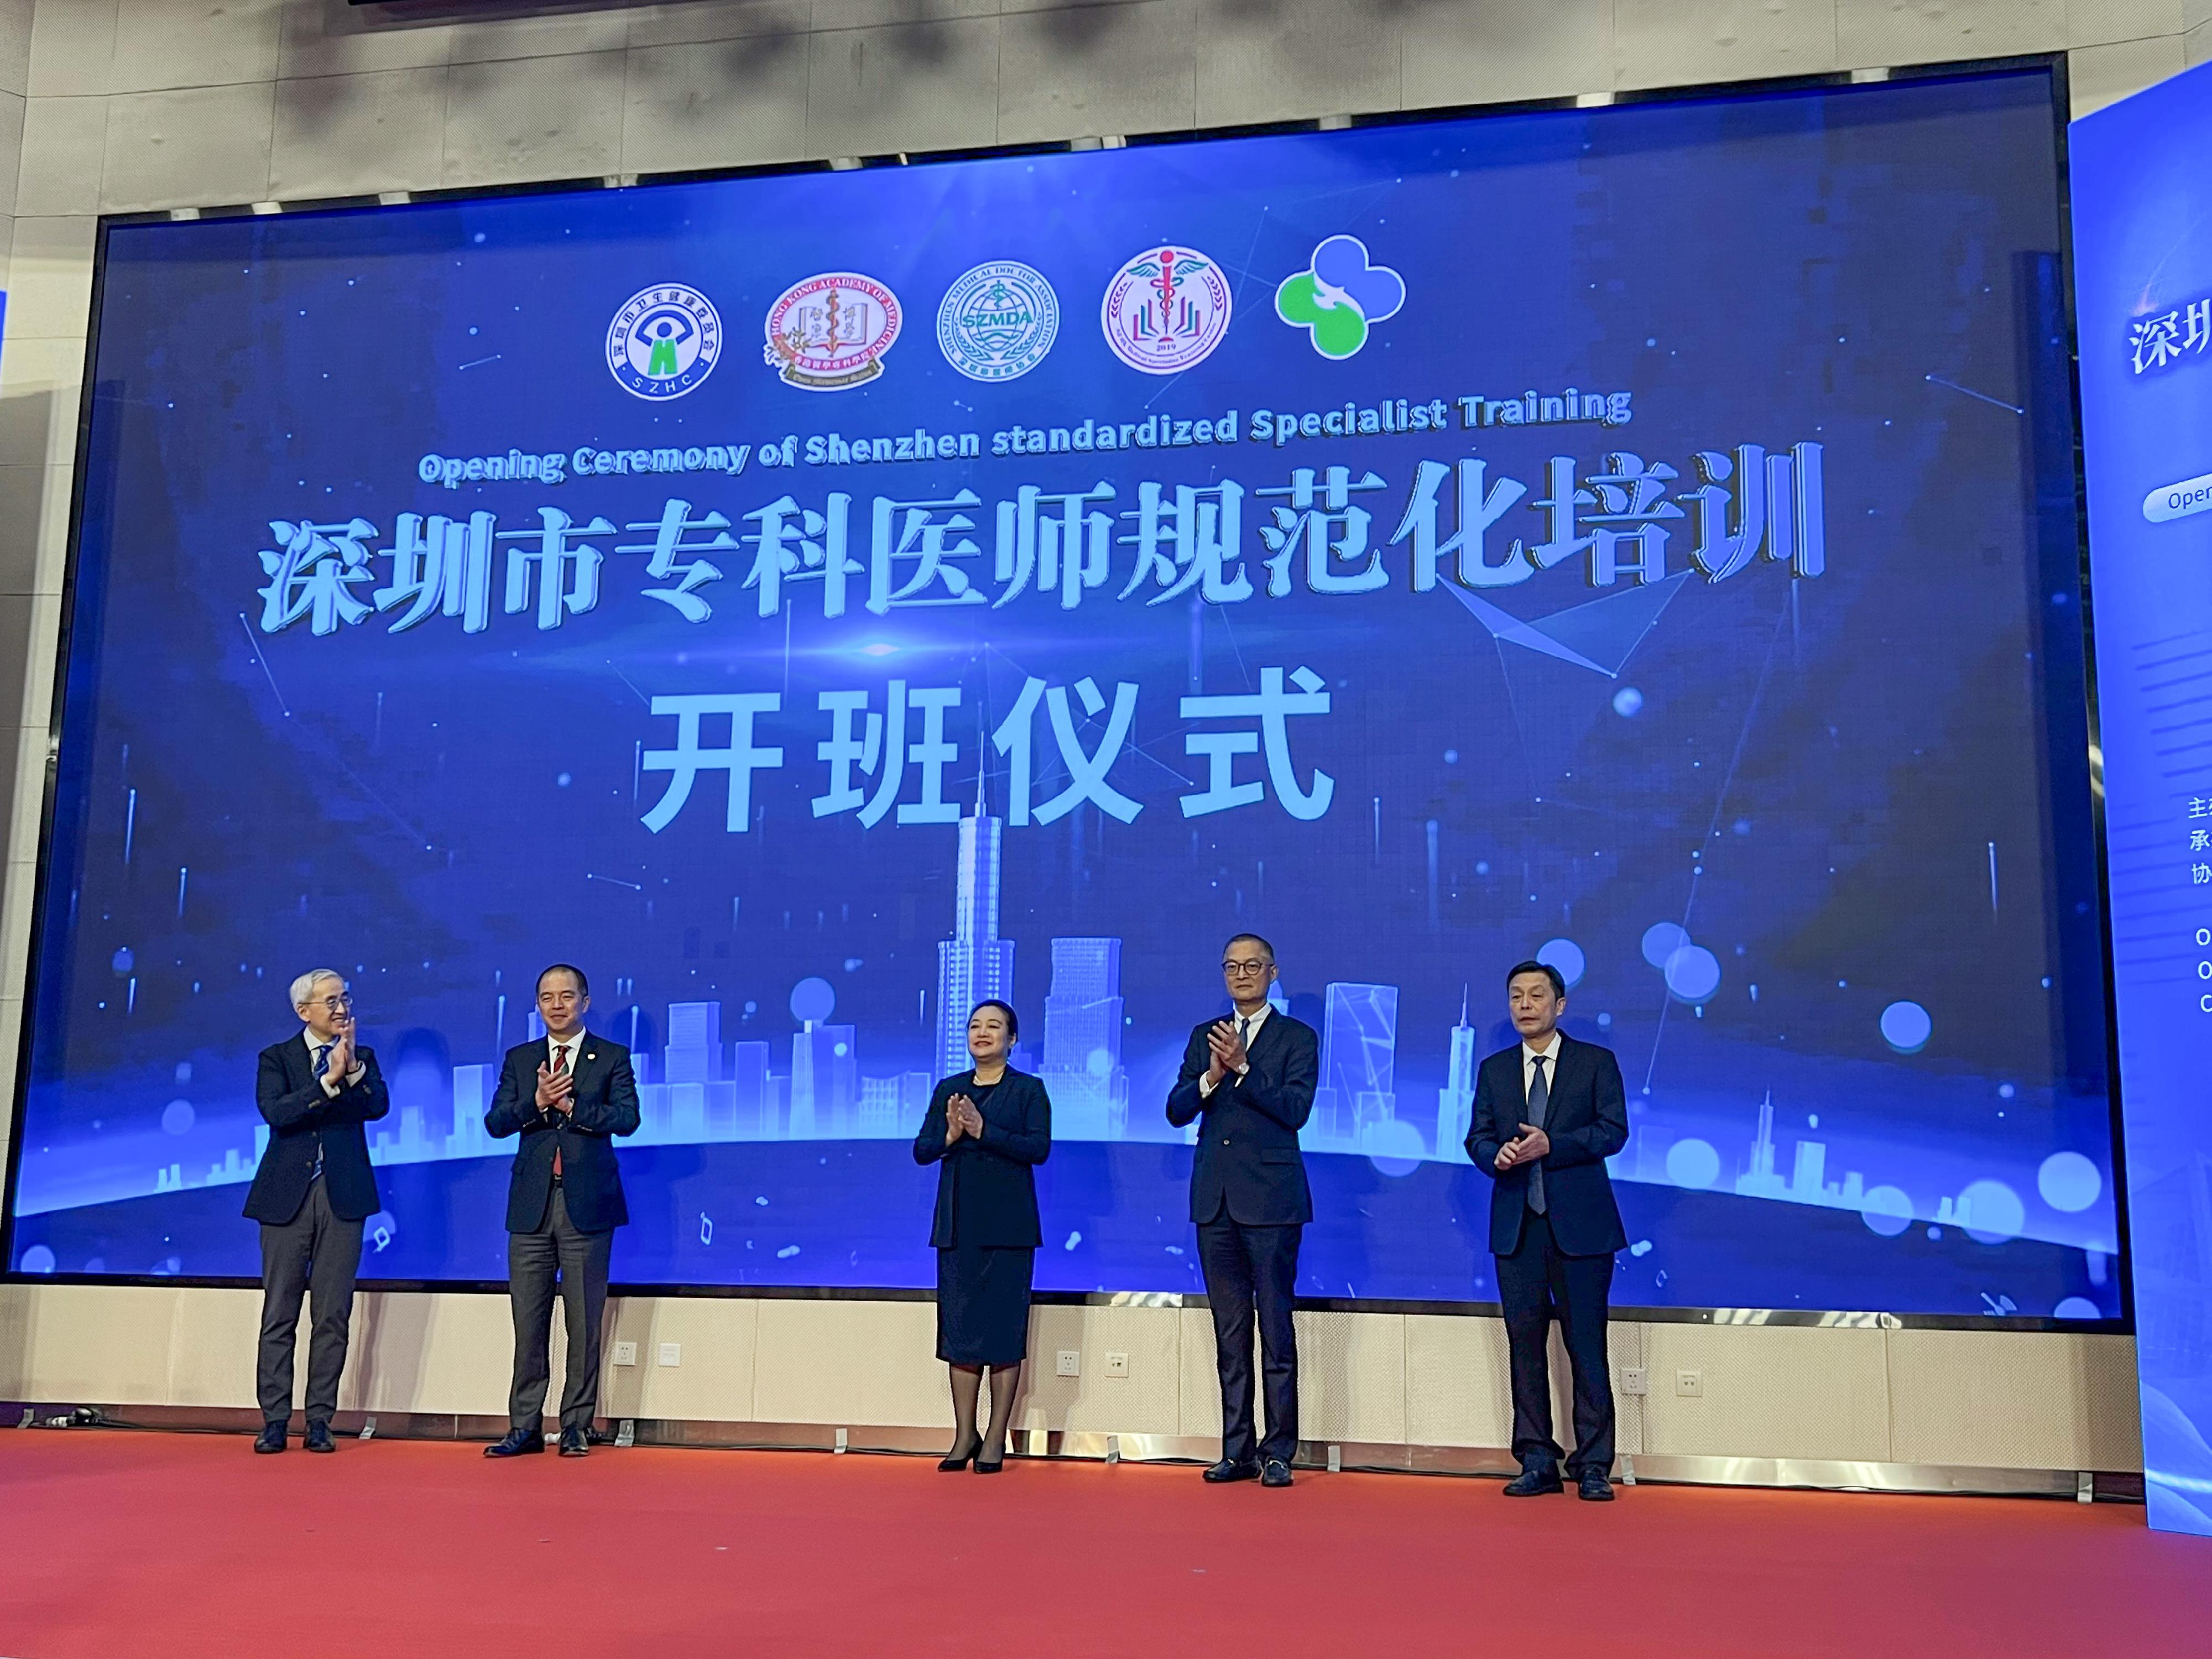 The Secretary for Health, Professor Lo Chung-mau (second right); the Director General of the Shenzhen Municipal Health Commission, Ms Wu Hongyan (centre); the President of the Hong Kong Academy of Medicine (HKAM), Professor Gilberto Leung (second left); the Vice-President of the HKAM (Education and Examinations), Professor Philip Li (first right); and the Hospital Chief Executive of the University of Hong Kong - Shenzhen Hospital, Professor Kenneth Cheung (first left), officiate at the opening ceremony of Shenzhen standardized specialist training in Shenzhen today (October 12).